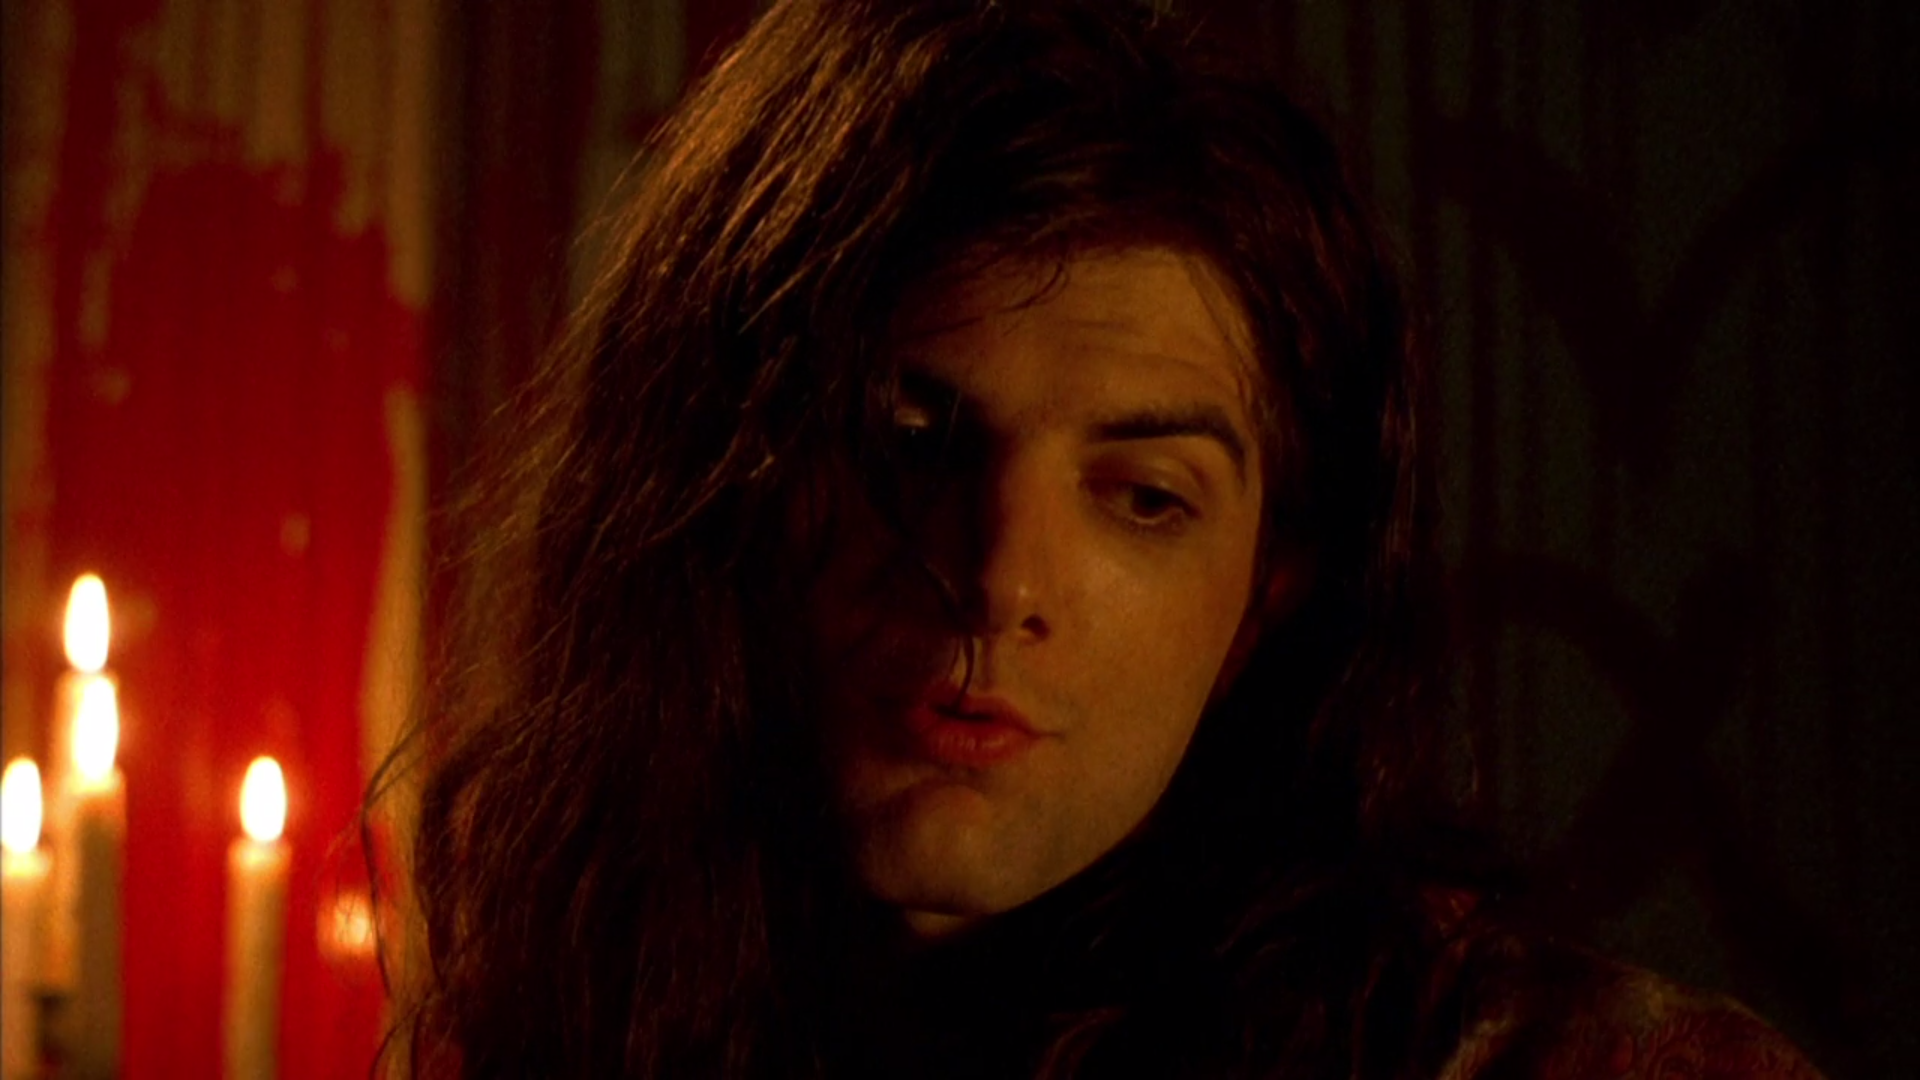 Actor Adam Scott has extremely long, flowing hair, and stands in a candelit room.